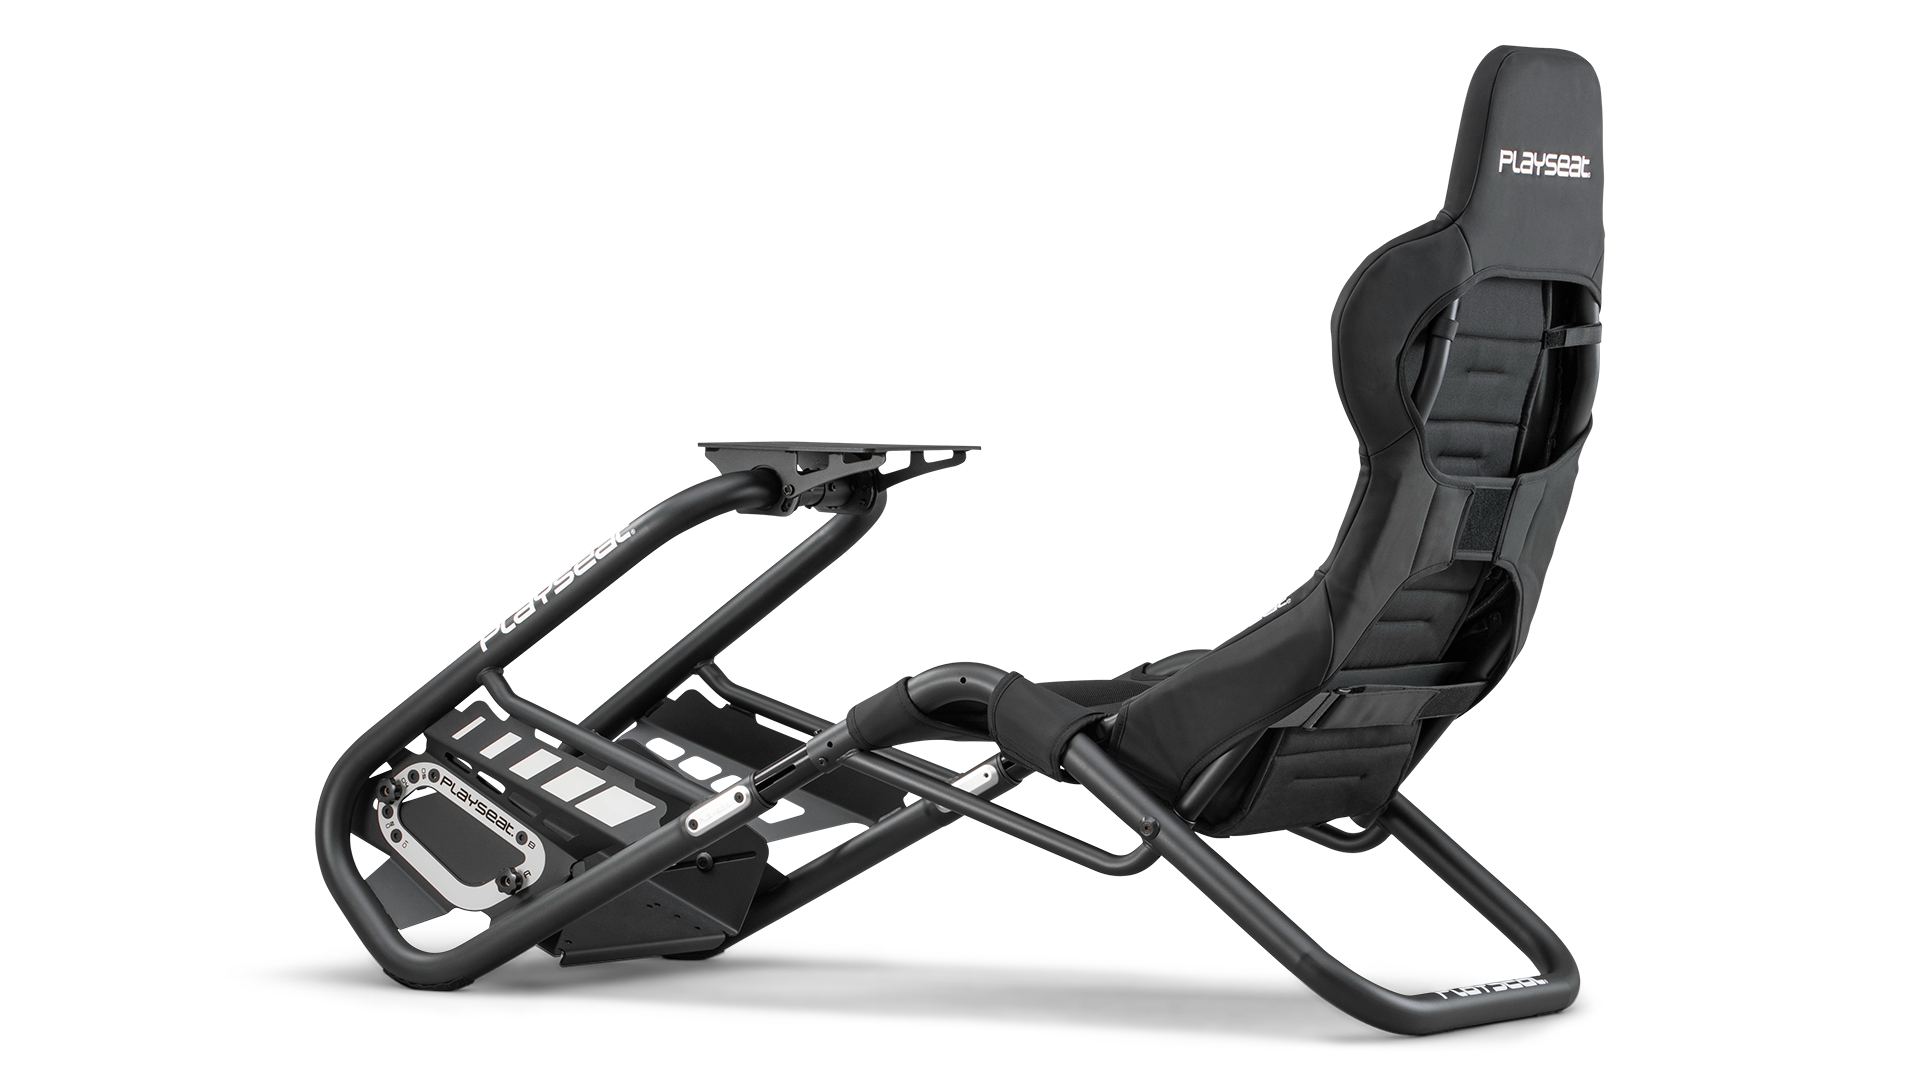 playseat-trophy-black-direct-drive-simulator-back-angle-view-1920x1080-5.png